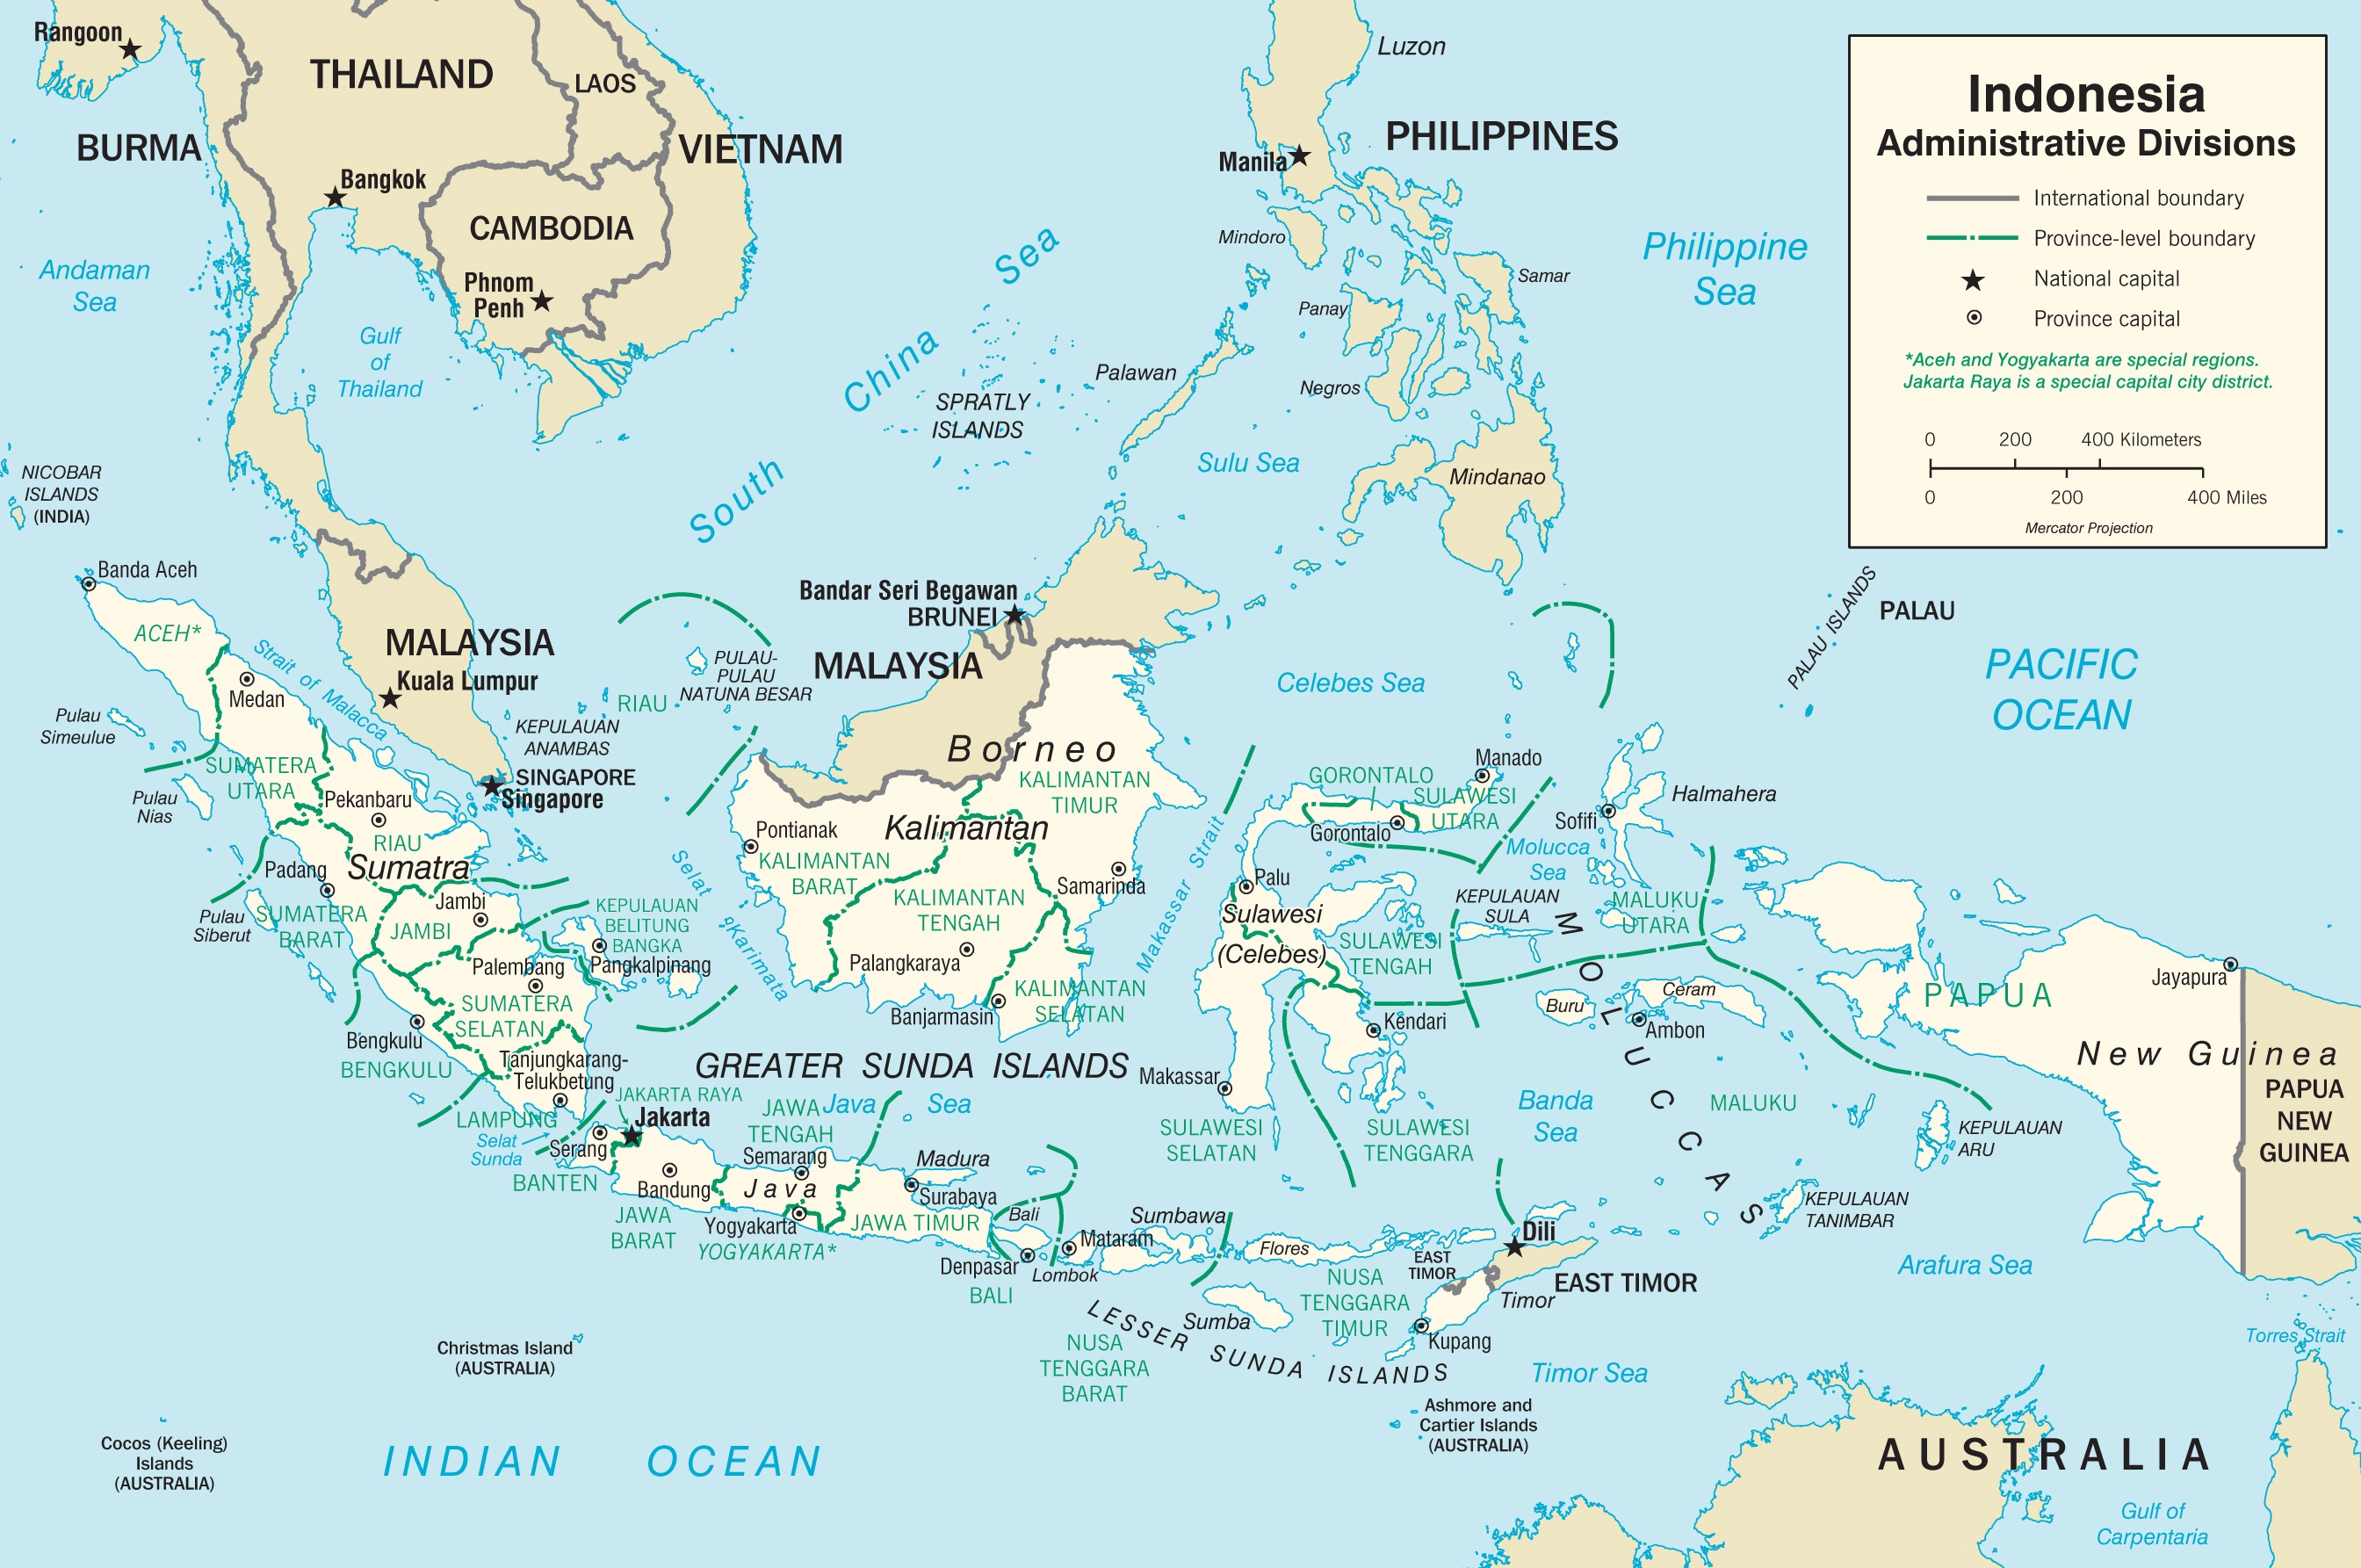 Indonesia On World Political Map - IMAGESEE